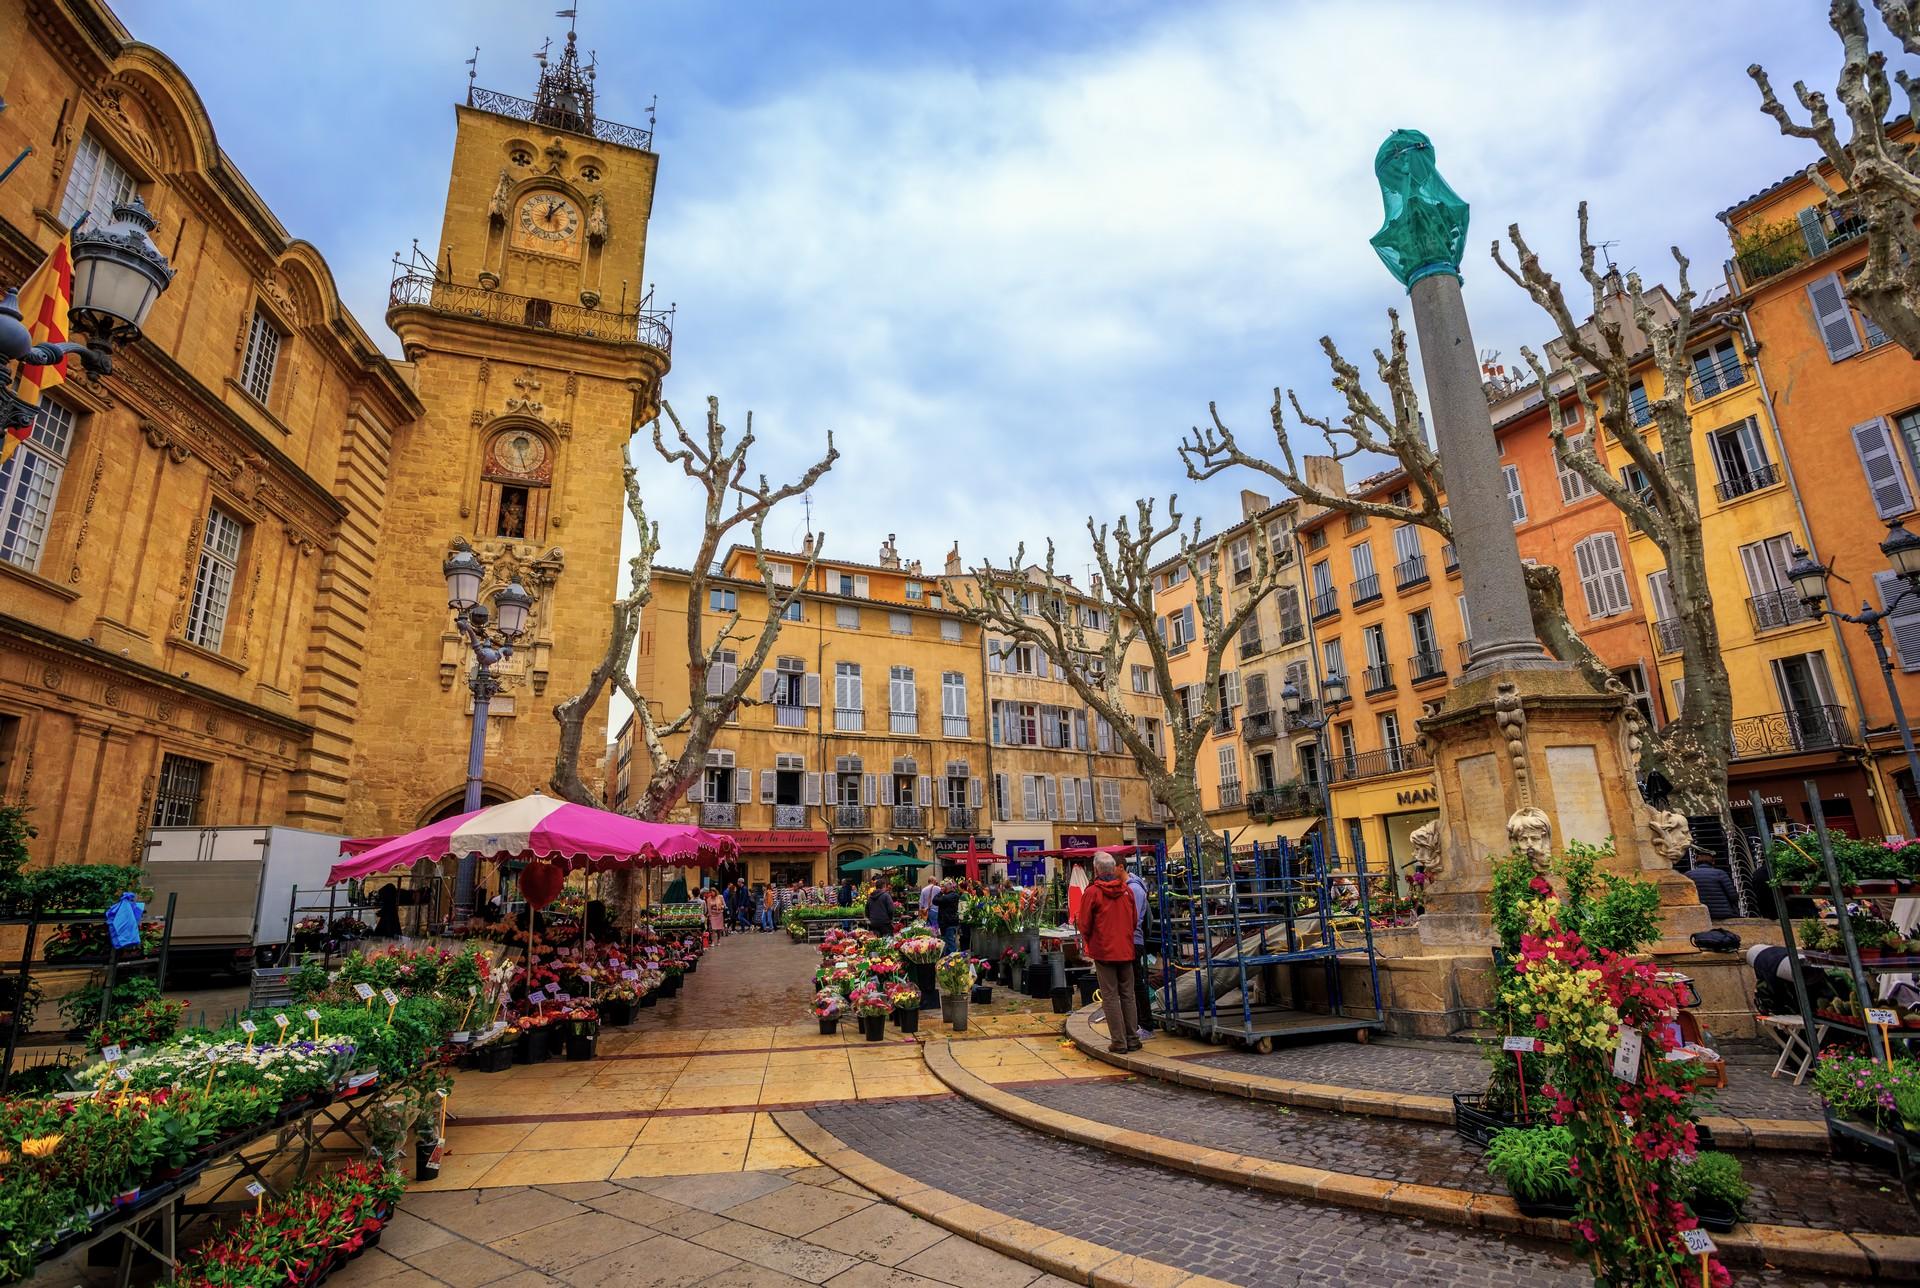 Architecture in Aix-en-Provence on a day with cloudy weather